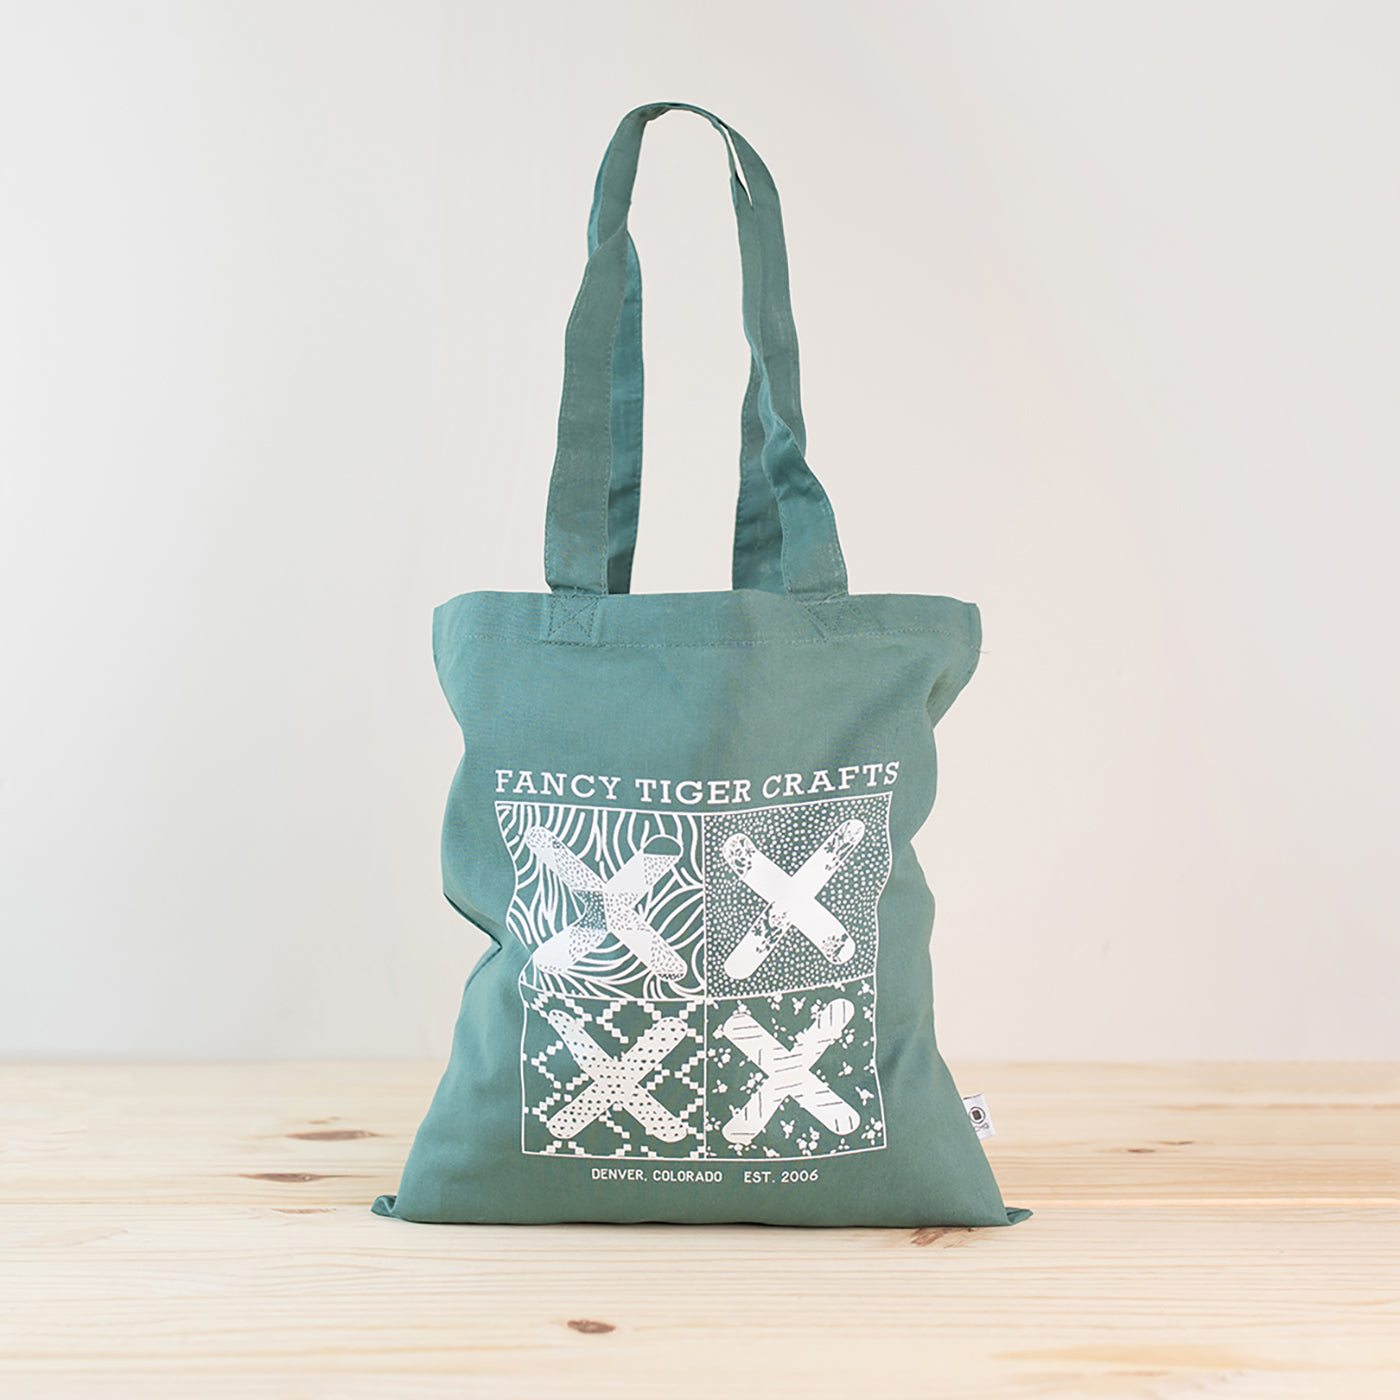 This is an image of a reusuable tote bag with the Fancy Tiger Crafts logo on the front of it sitting in front of a white wall and on a wood floor